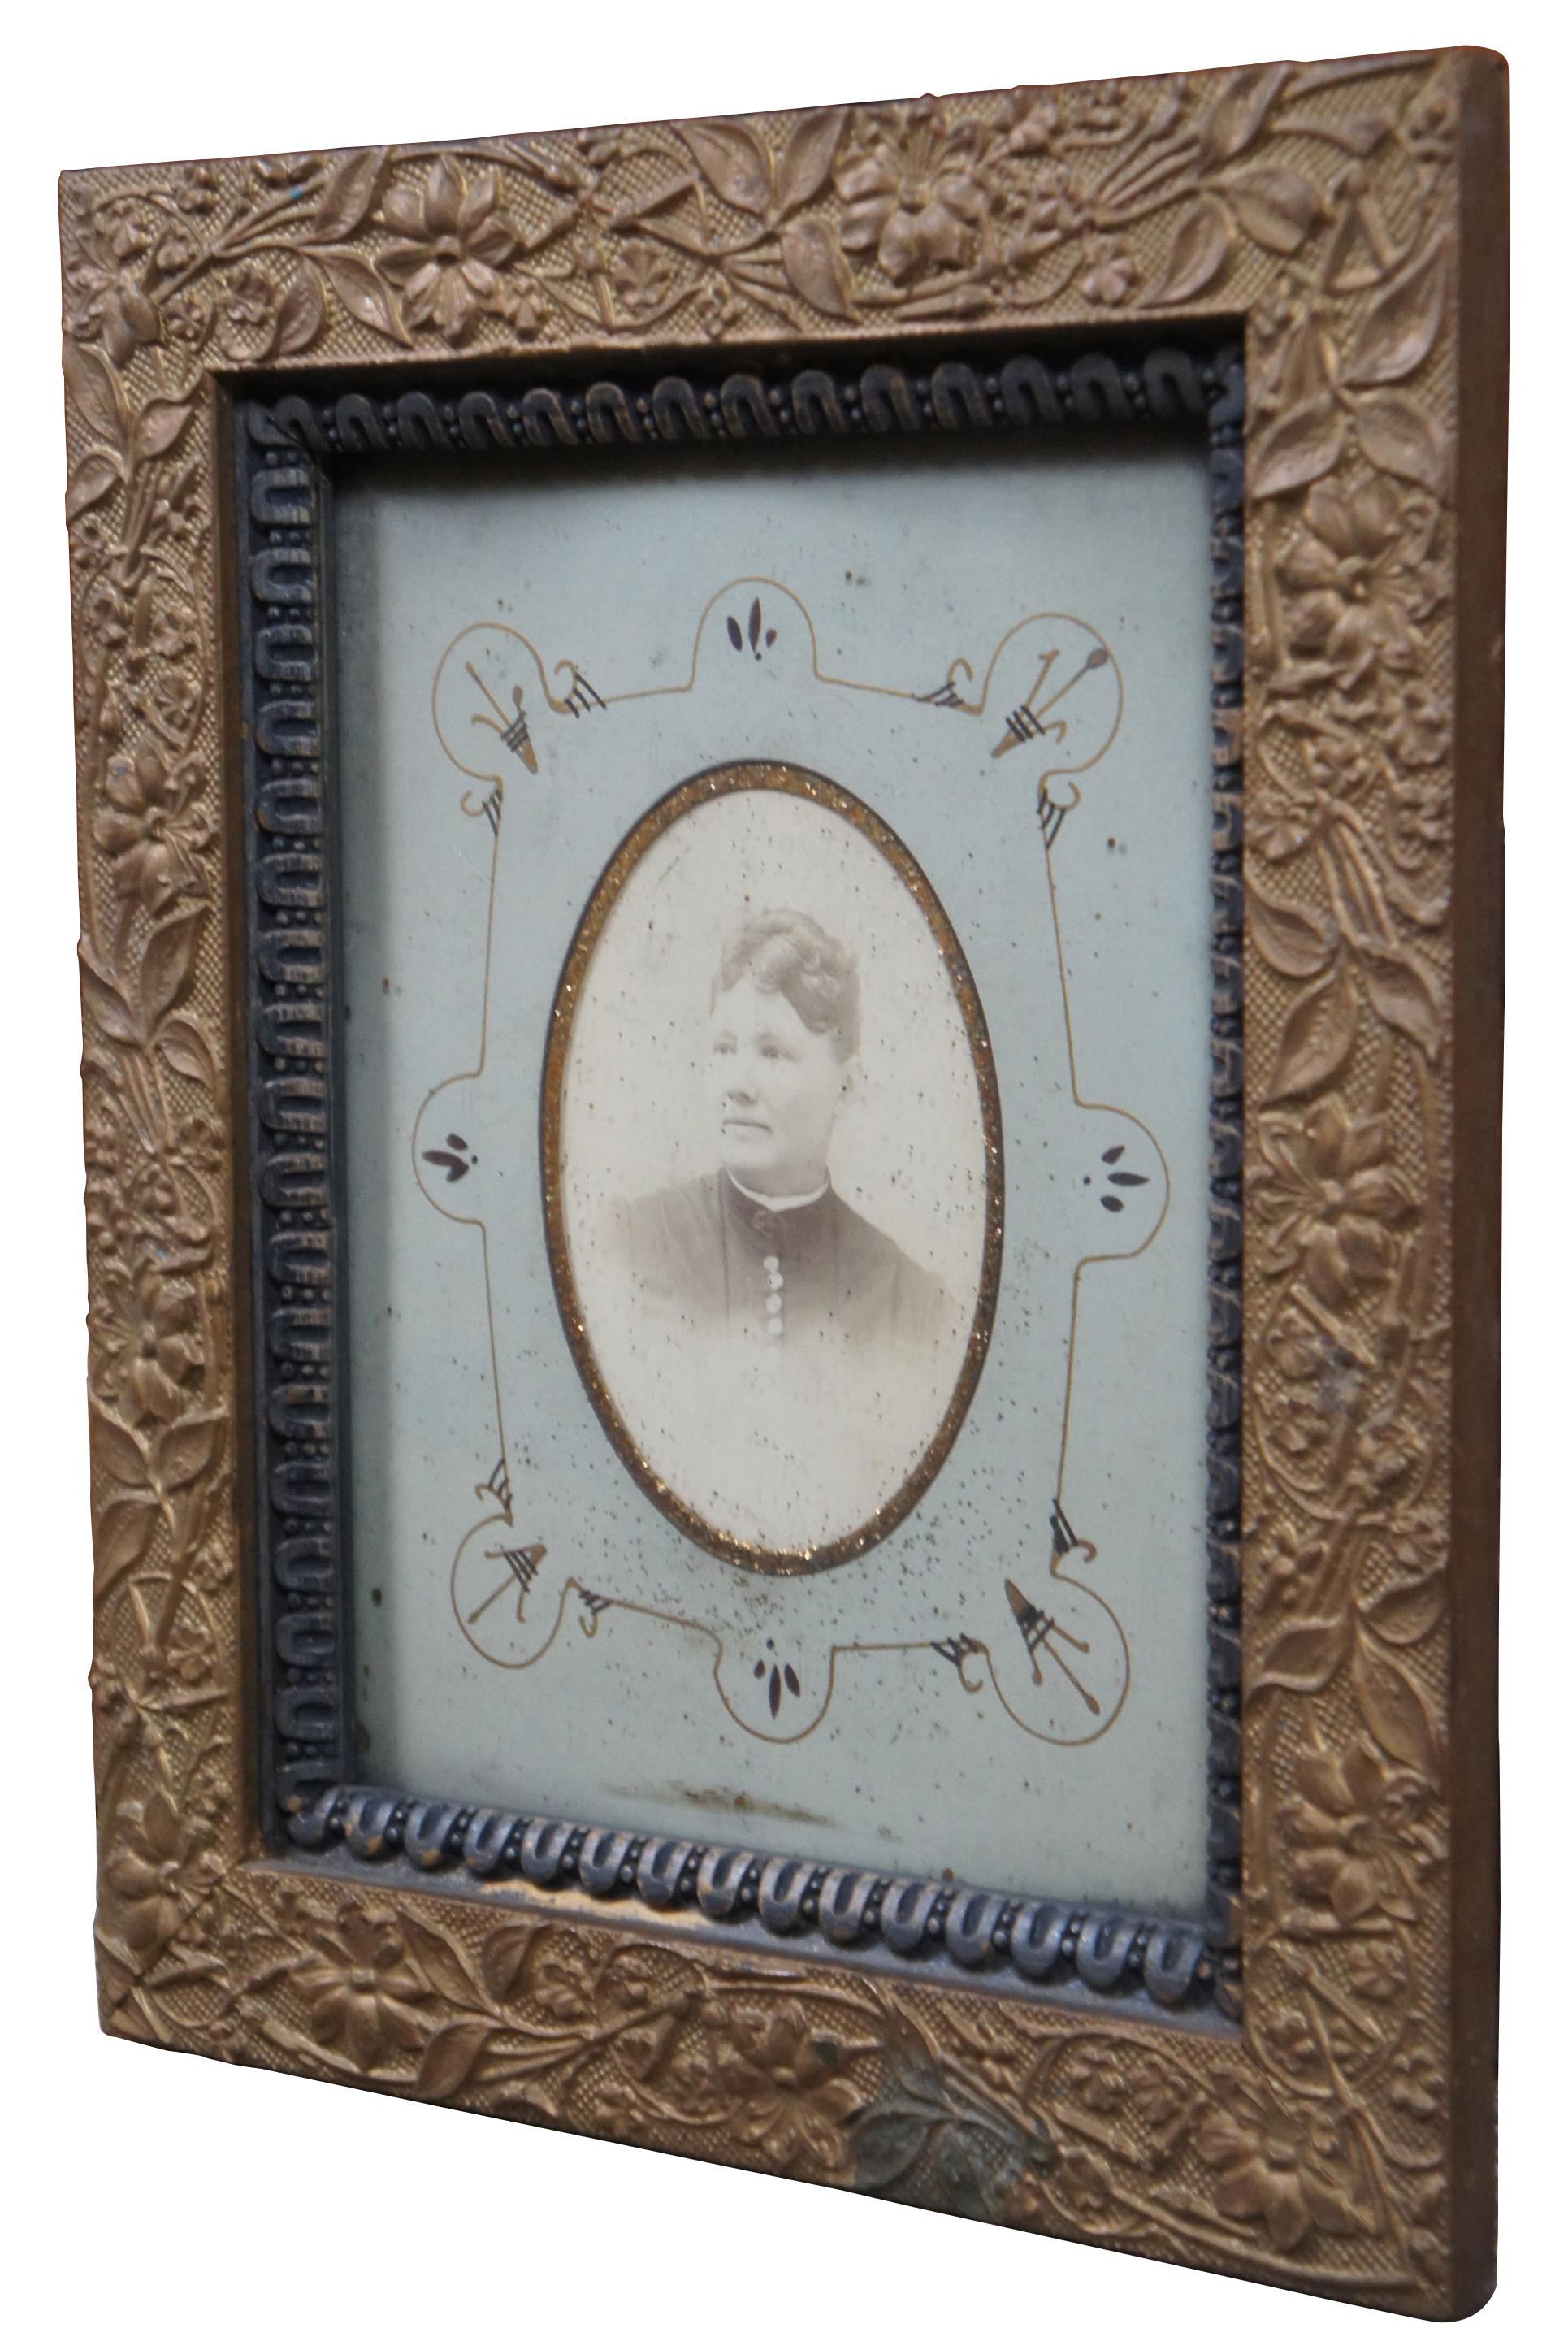 Antique late 19th century Victorian gilt wood carved photo frame containing a photograph of a woman.

Measures: 11.75” x 1” x 13.75” / sans frame - 7.75” x 9.75” (width x depth x height).